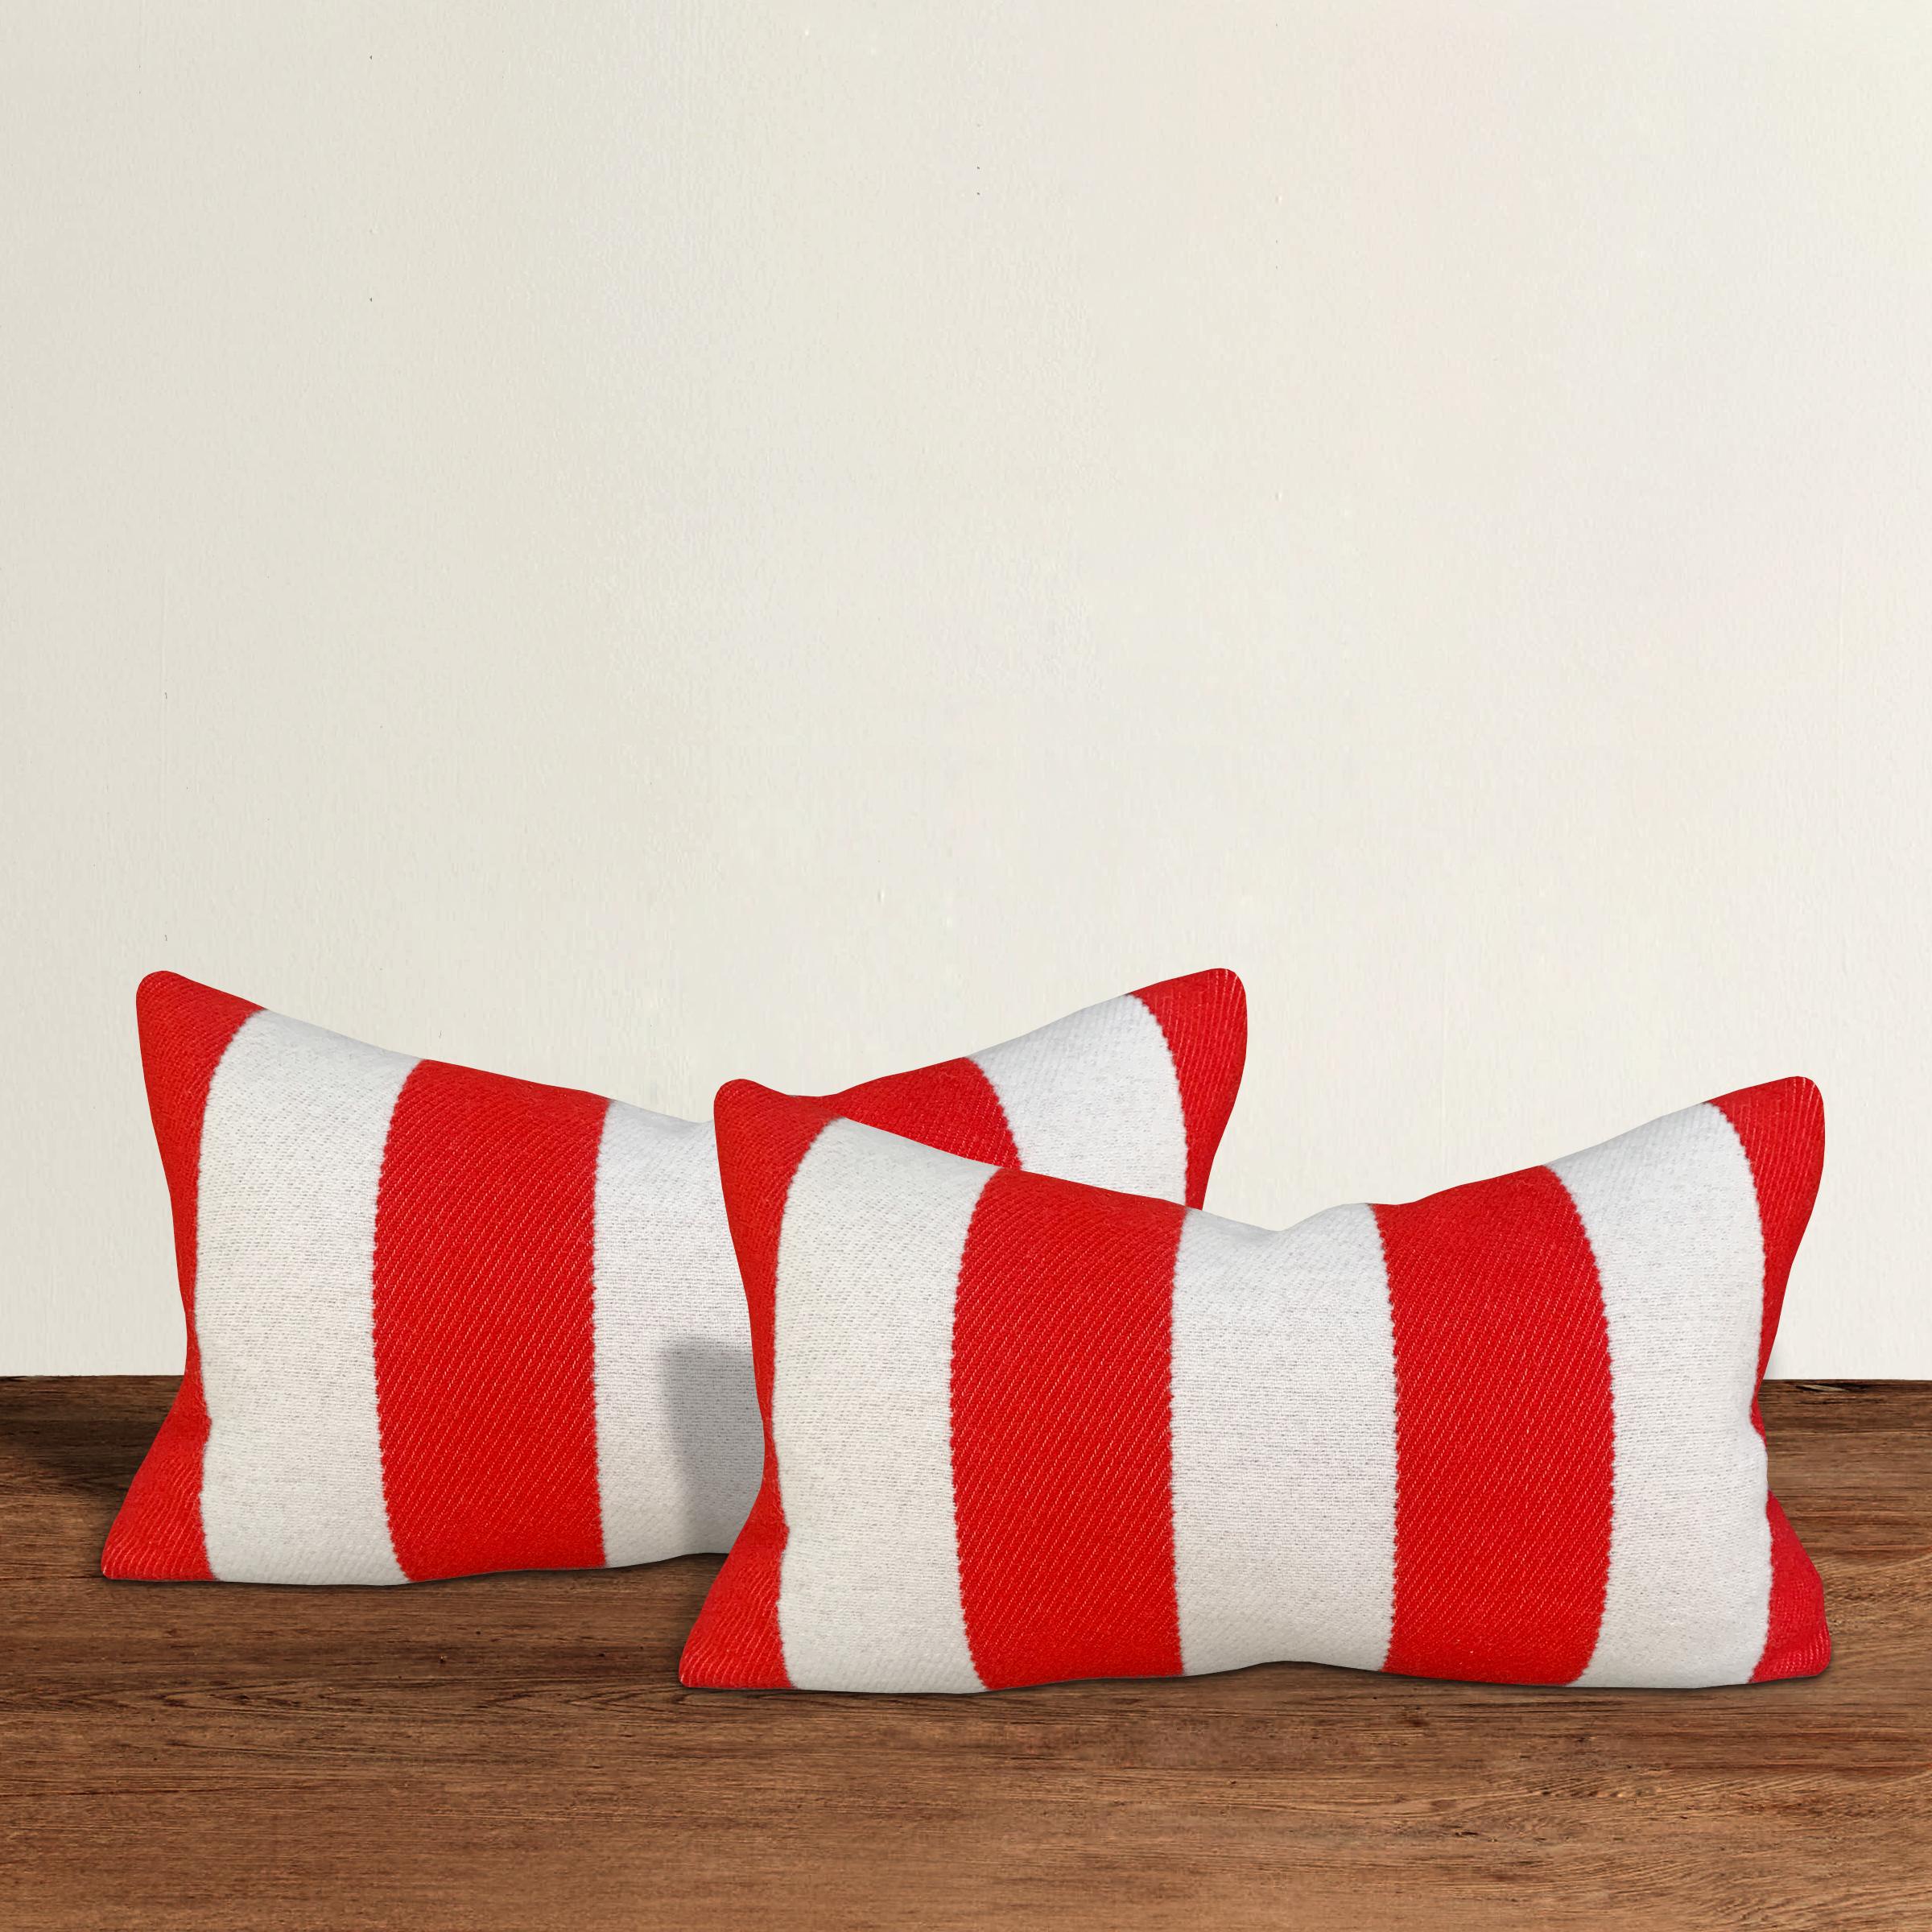 A wonderful pair of lumbar pillows with wide red and white stripes on one side, and solid blue on the other, custom made from wool sourced from the Faribault Woolen Mills in Faribault, Minnesota. Faribault Woolen Mills was founded in 1865 along the